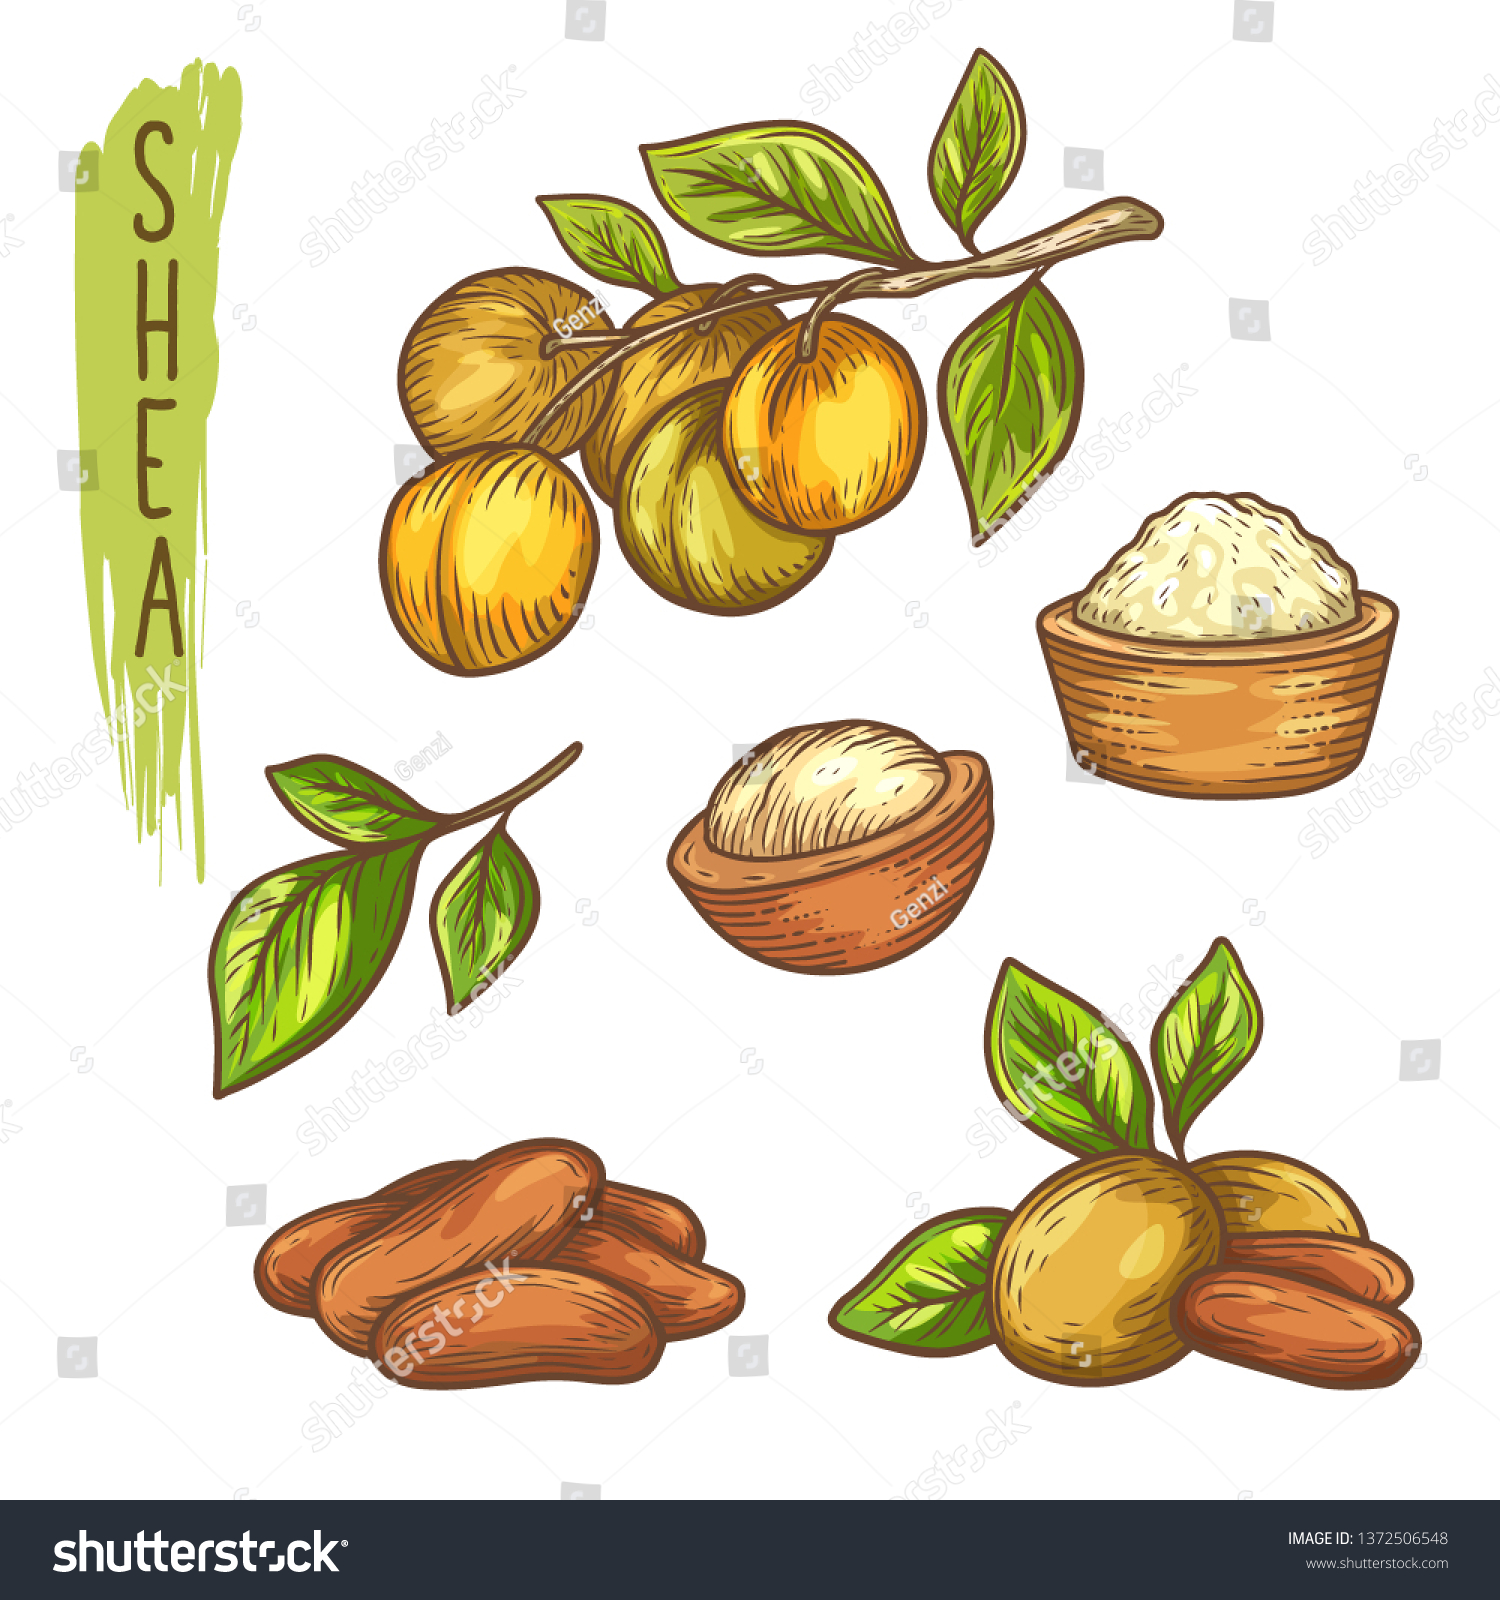 SVG of Sketch of shea nut and butter, branch with leaf svg